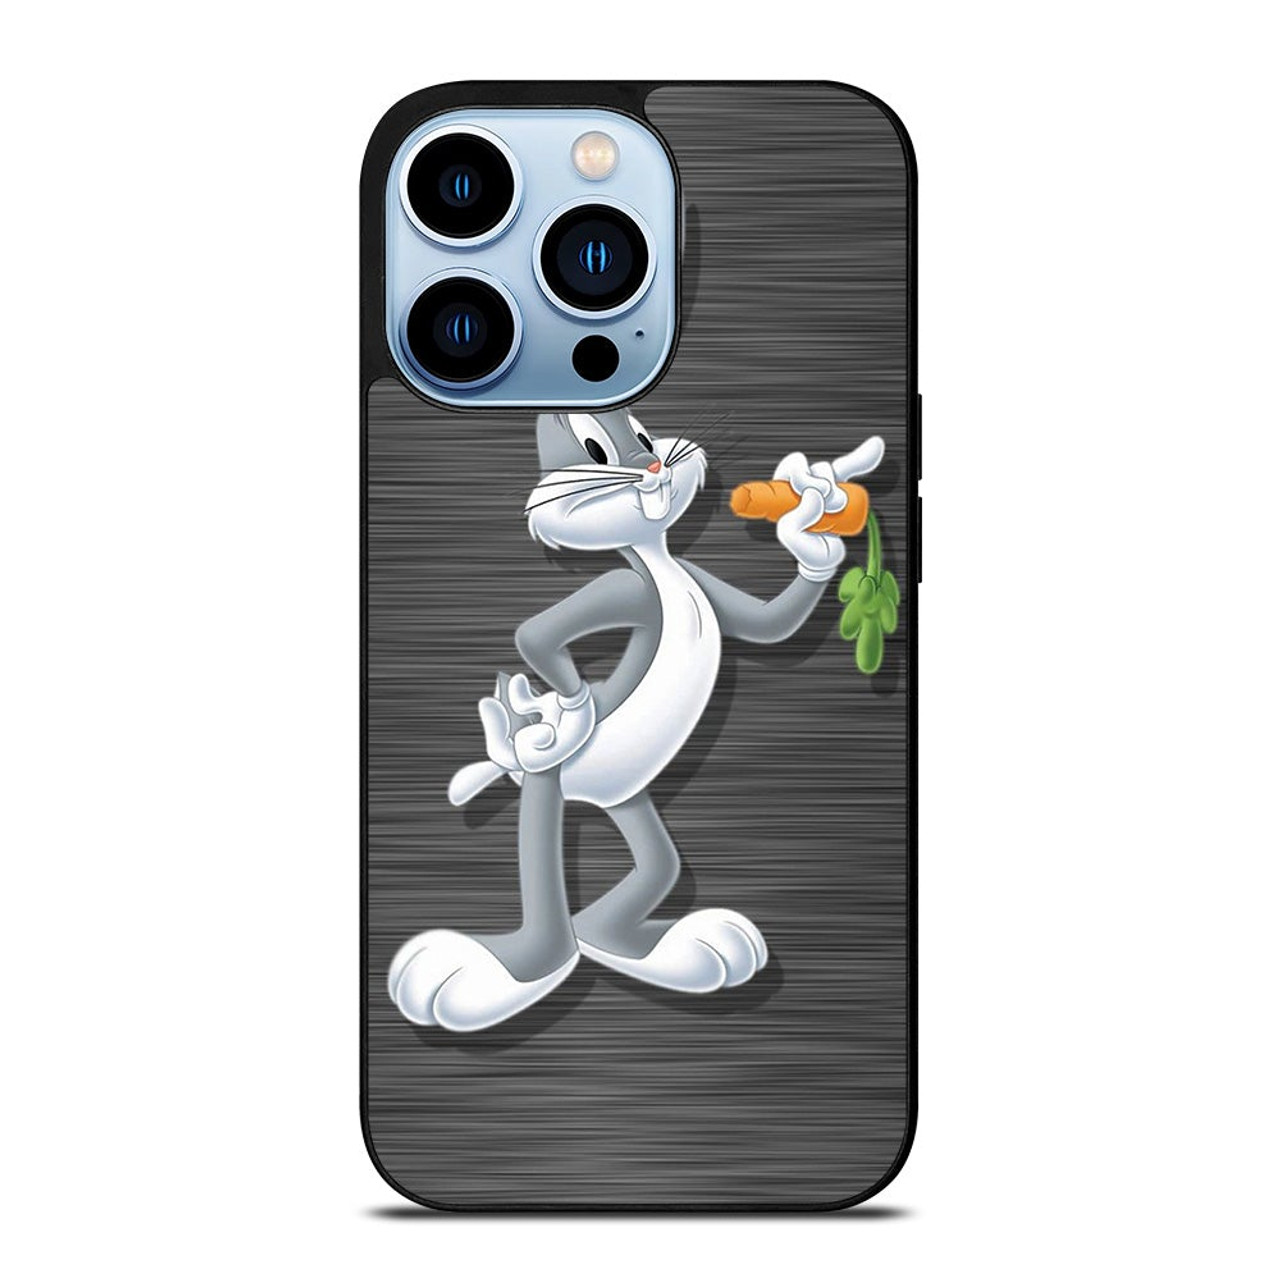 Bugs Bunny Hypebeast Hard Plastic Protective Clear Case Cover For Appl –  Xtracasestore